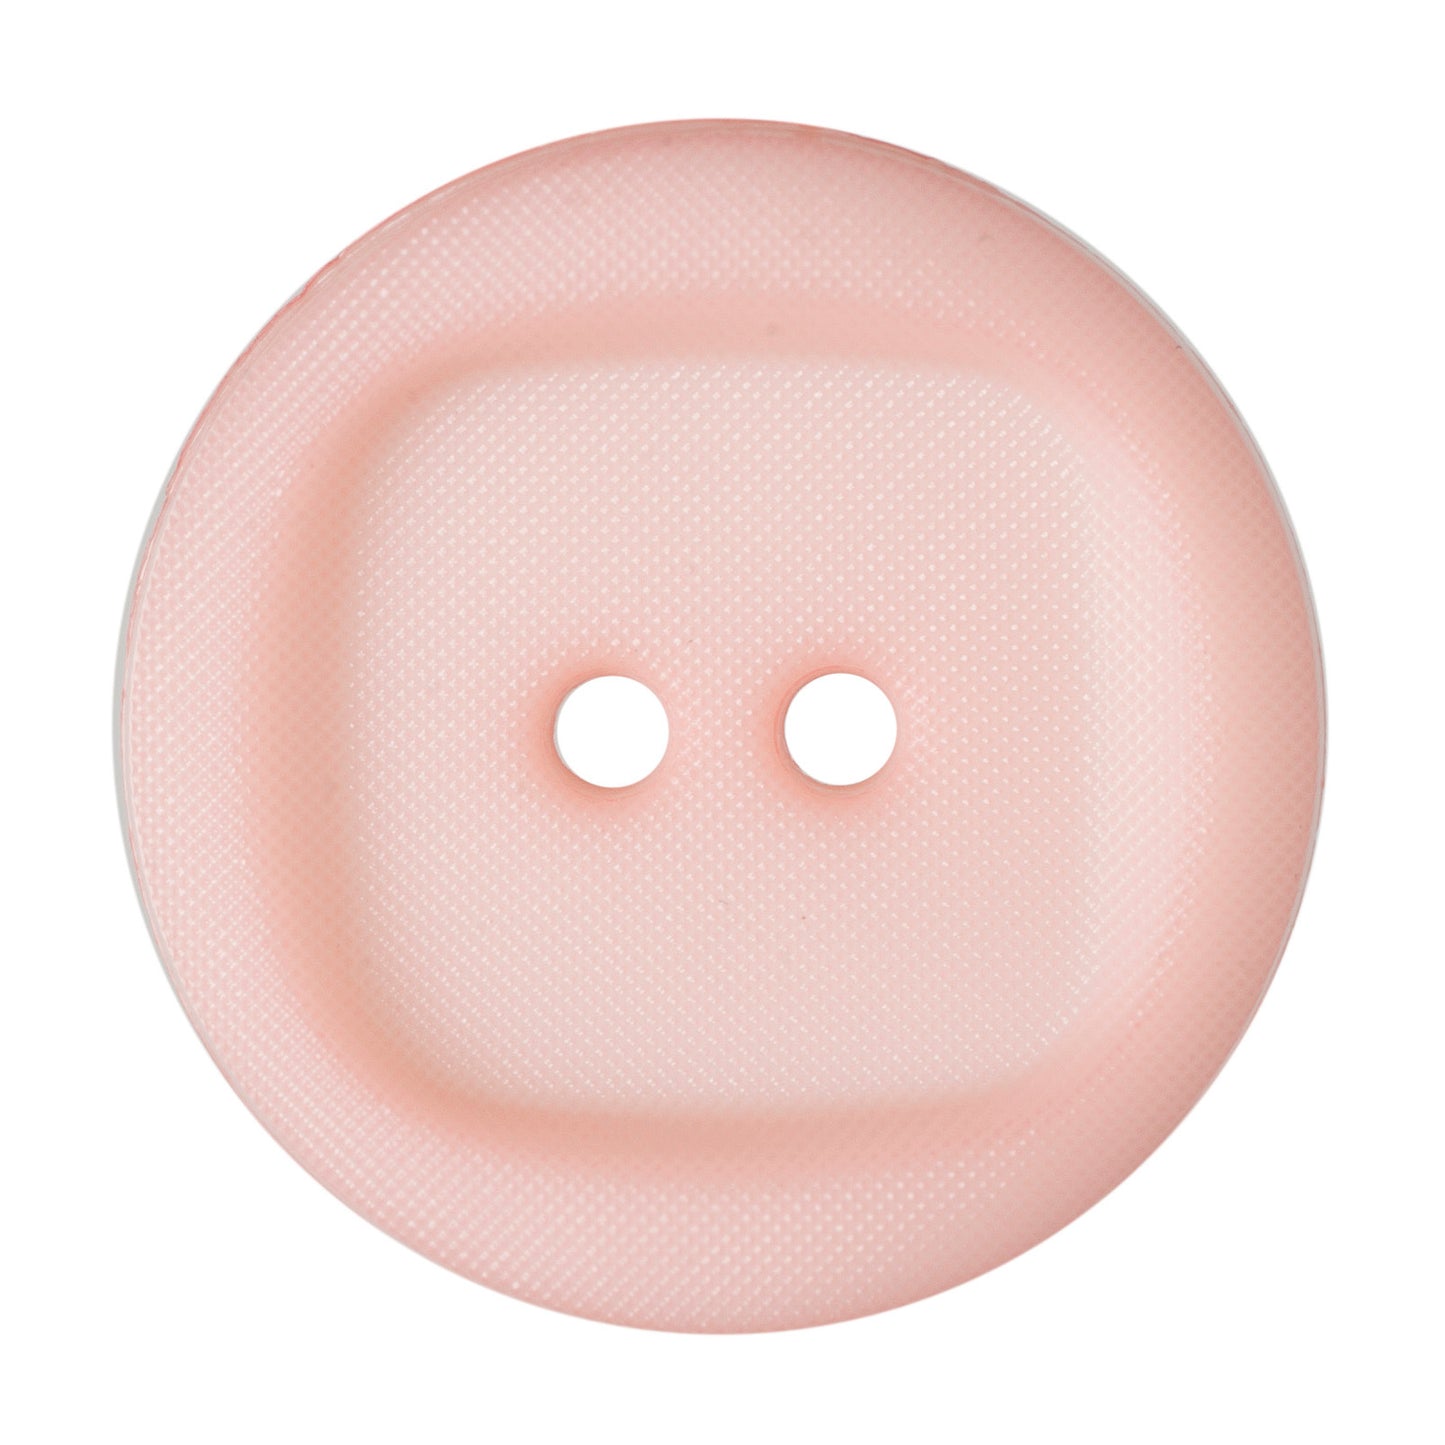 2 Hole Wavy with Square Insert Button - 20mm - Pink [LD7.1]